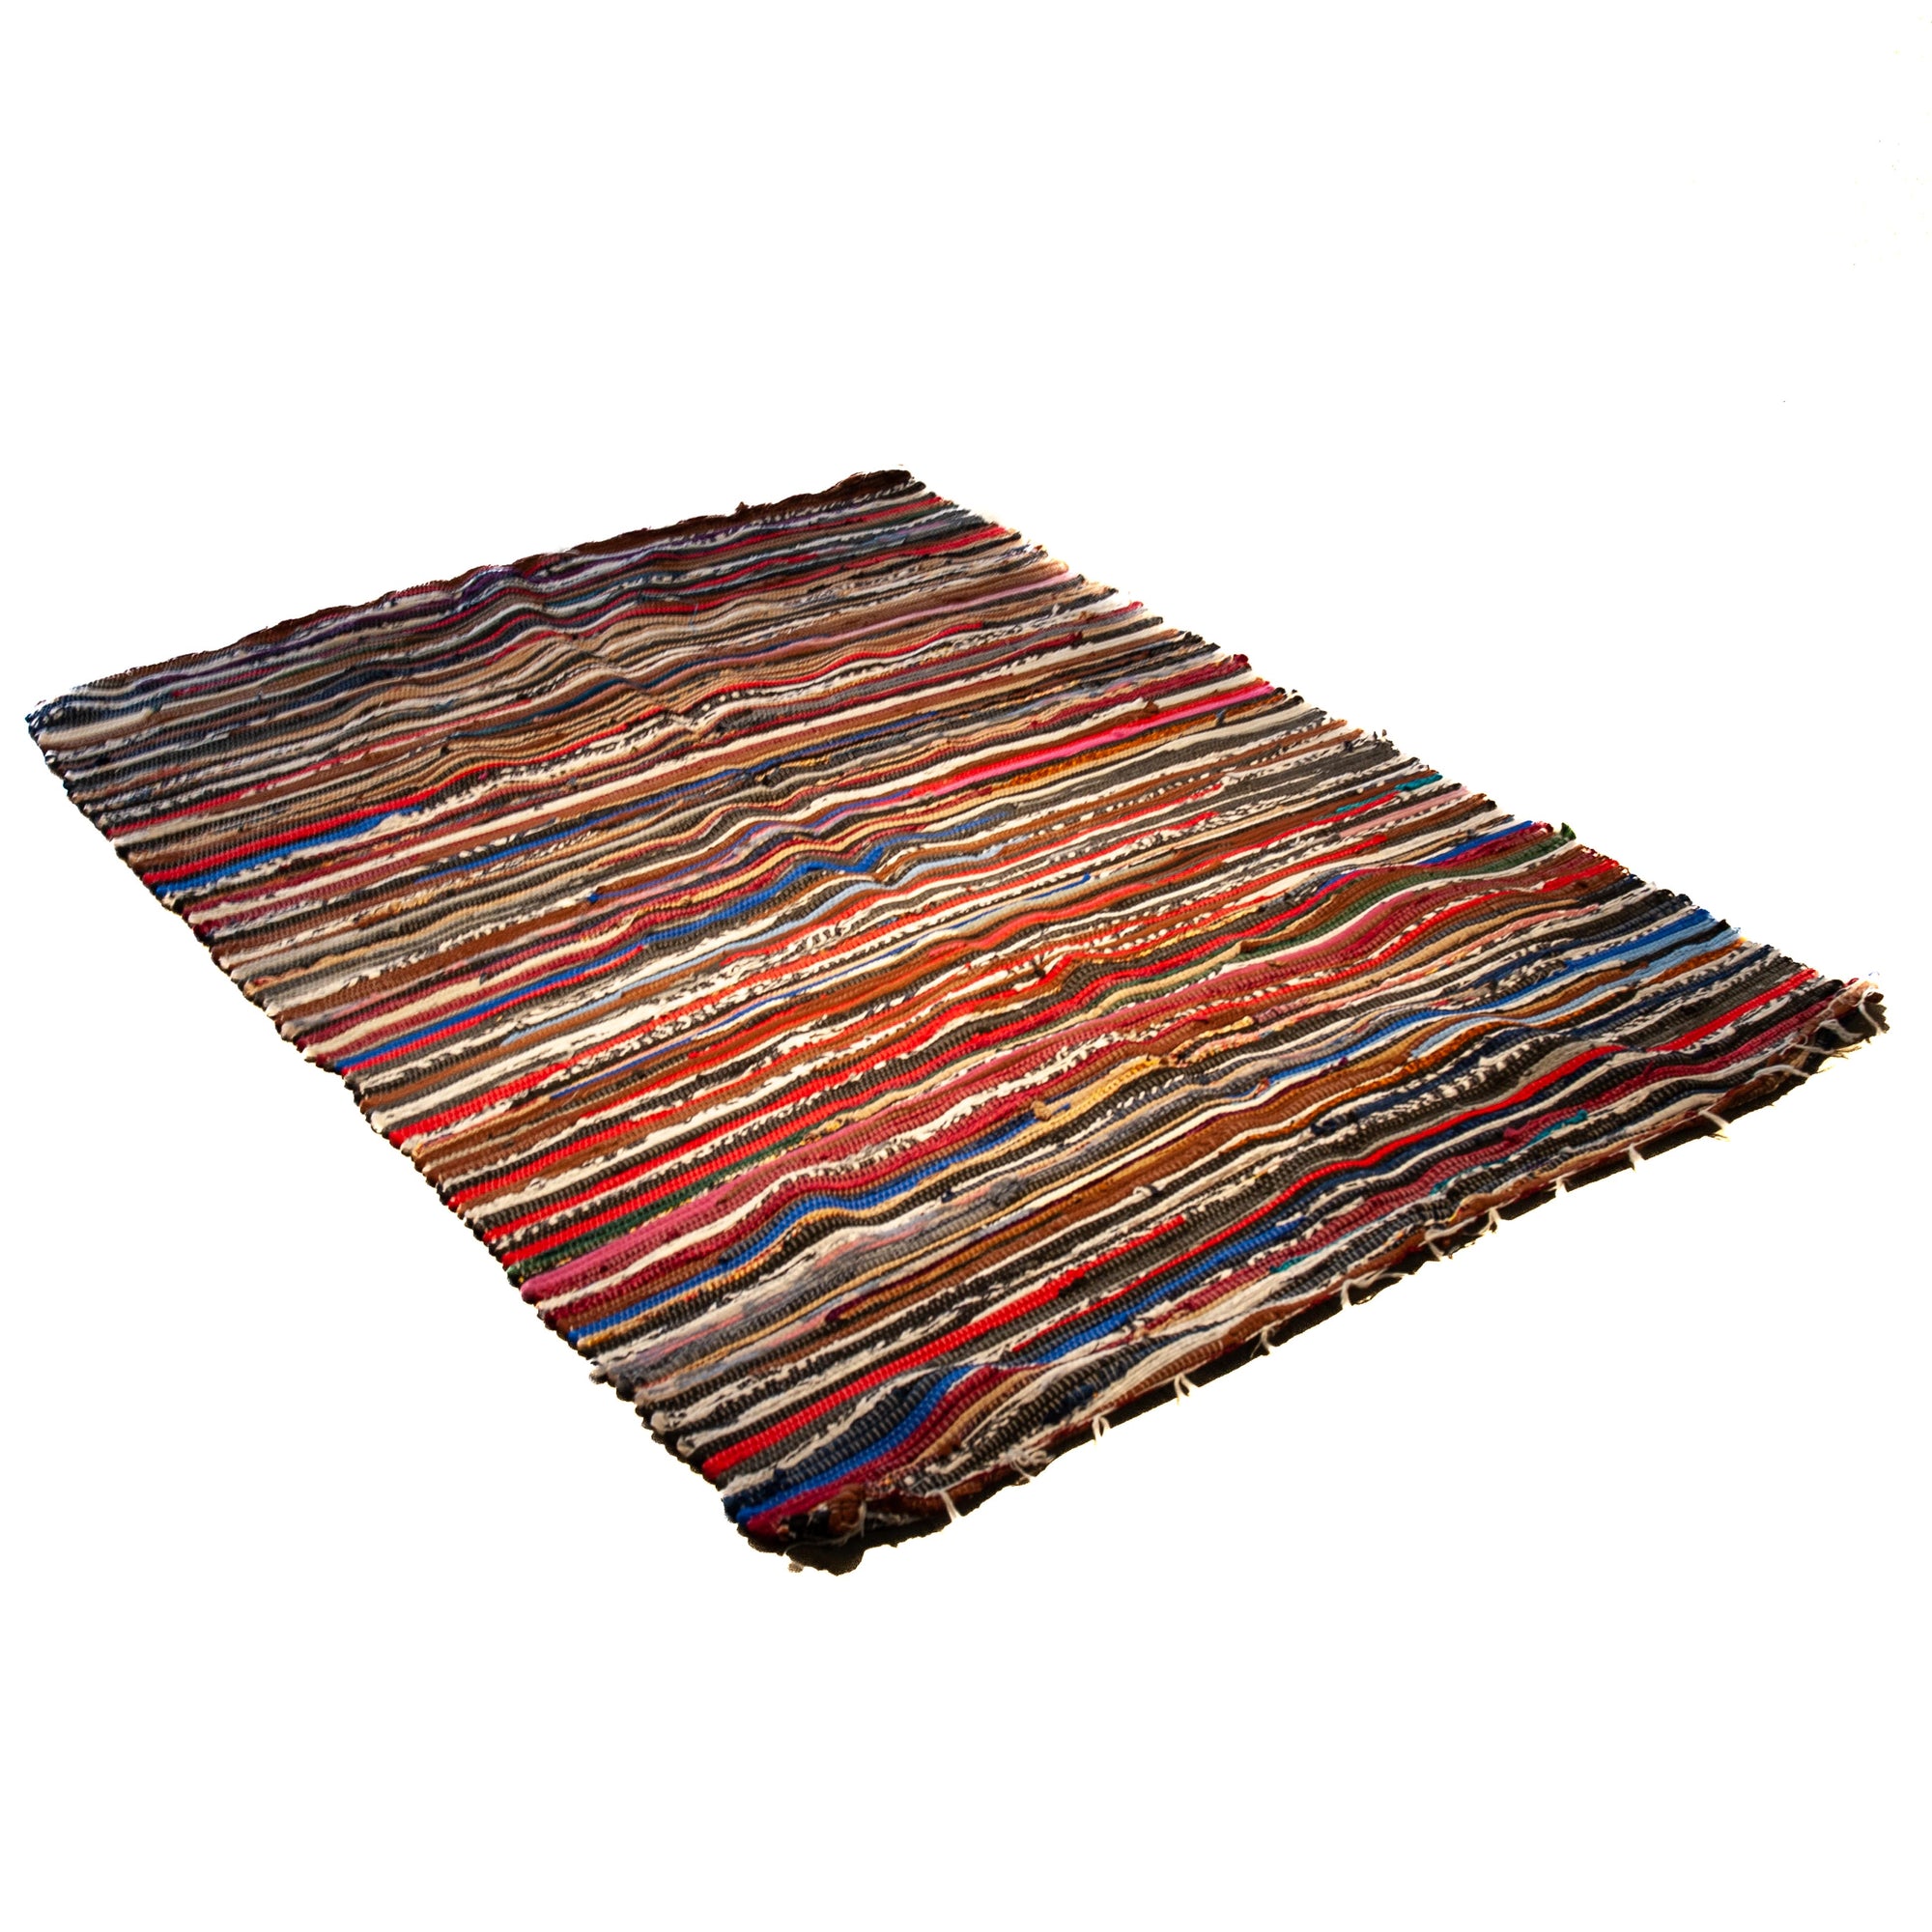 Egyptian Recycled Cotton Rug - 2 M x 1.5 M - Mixed